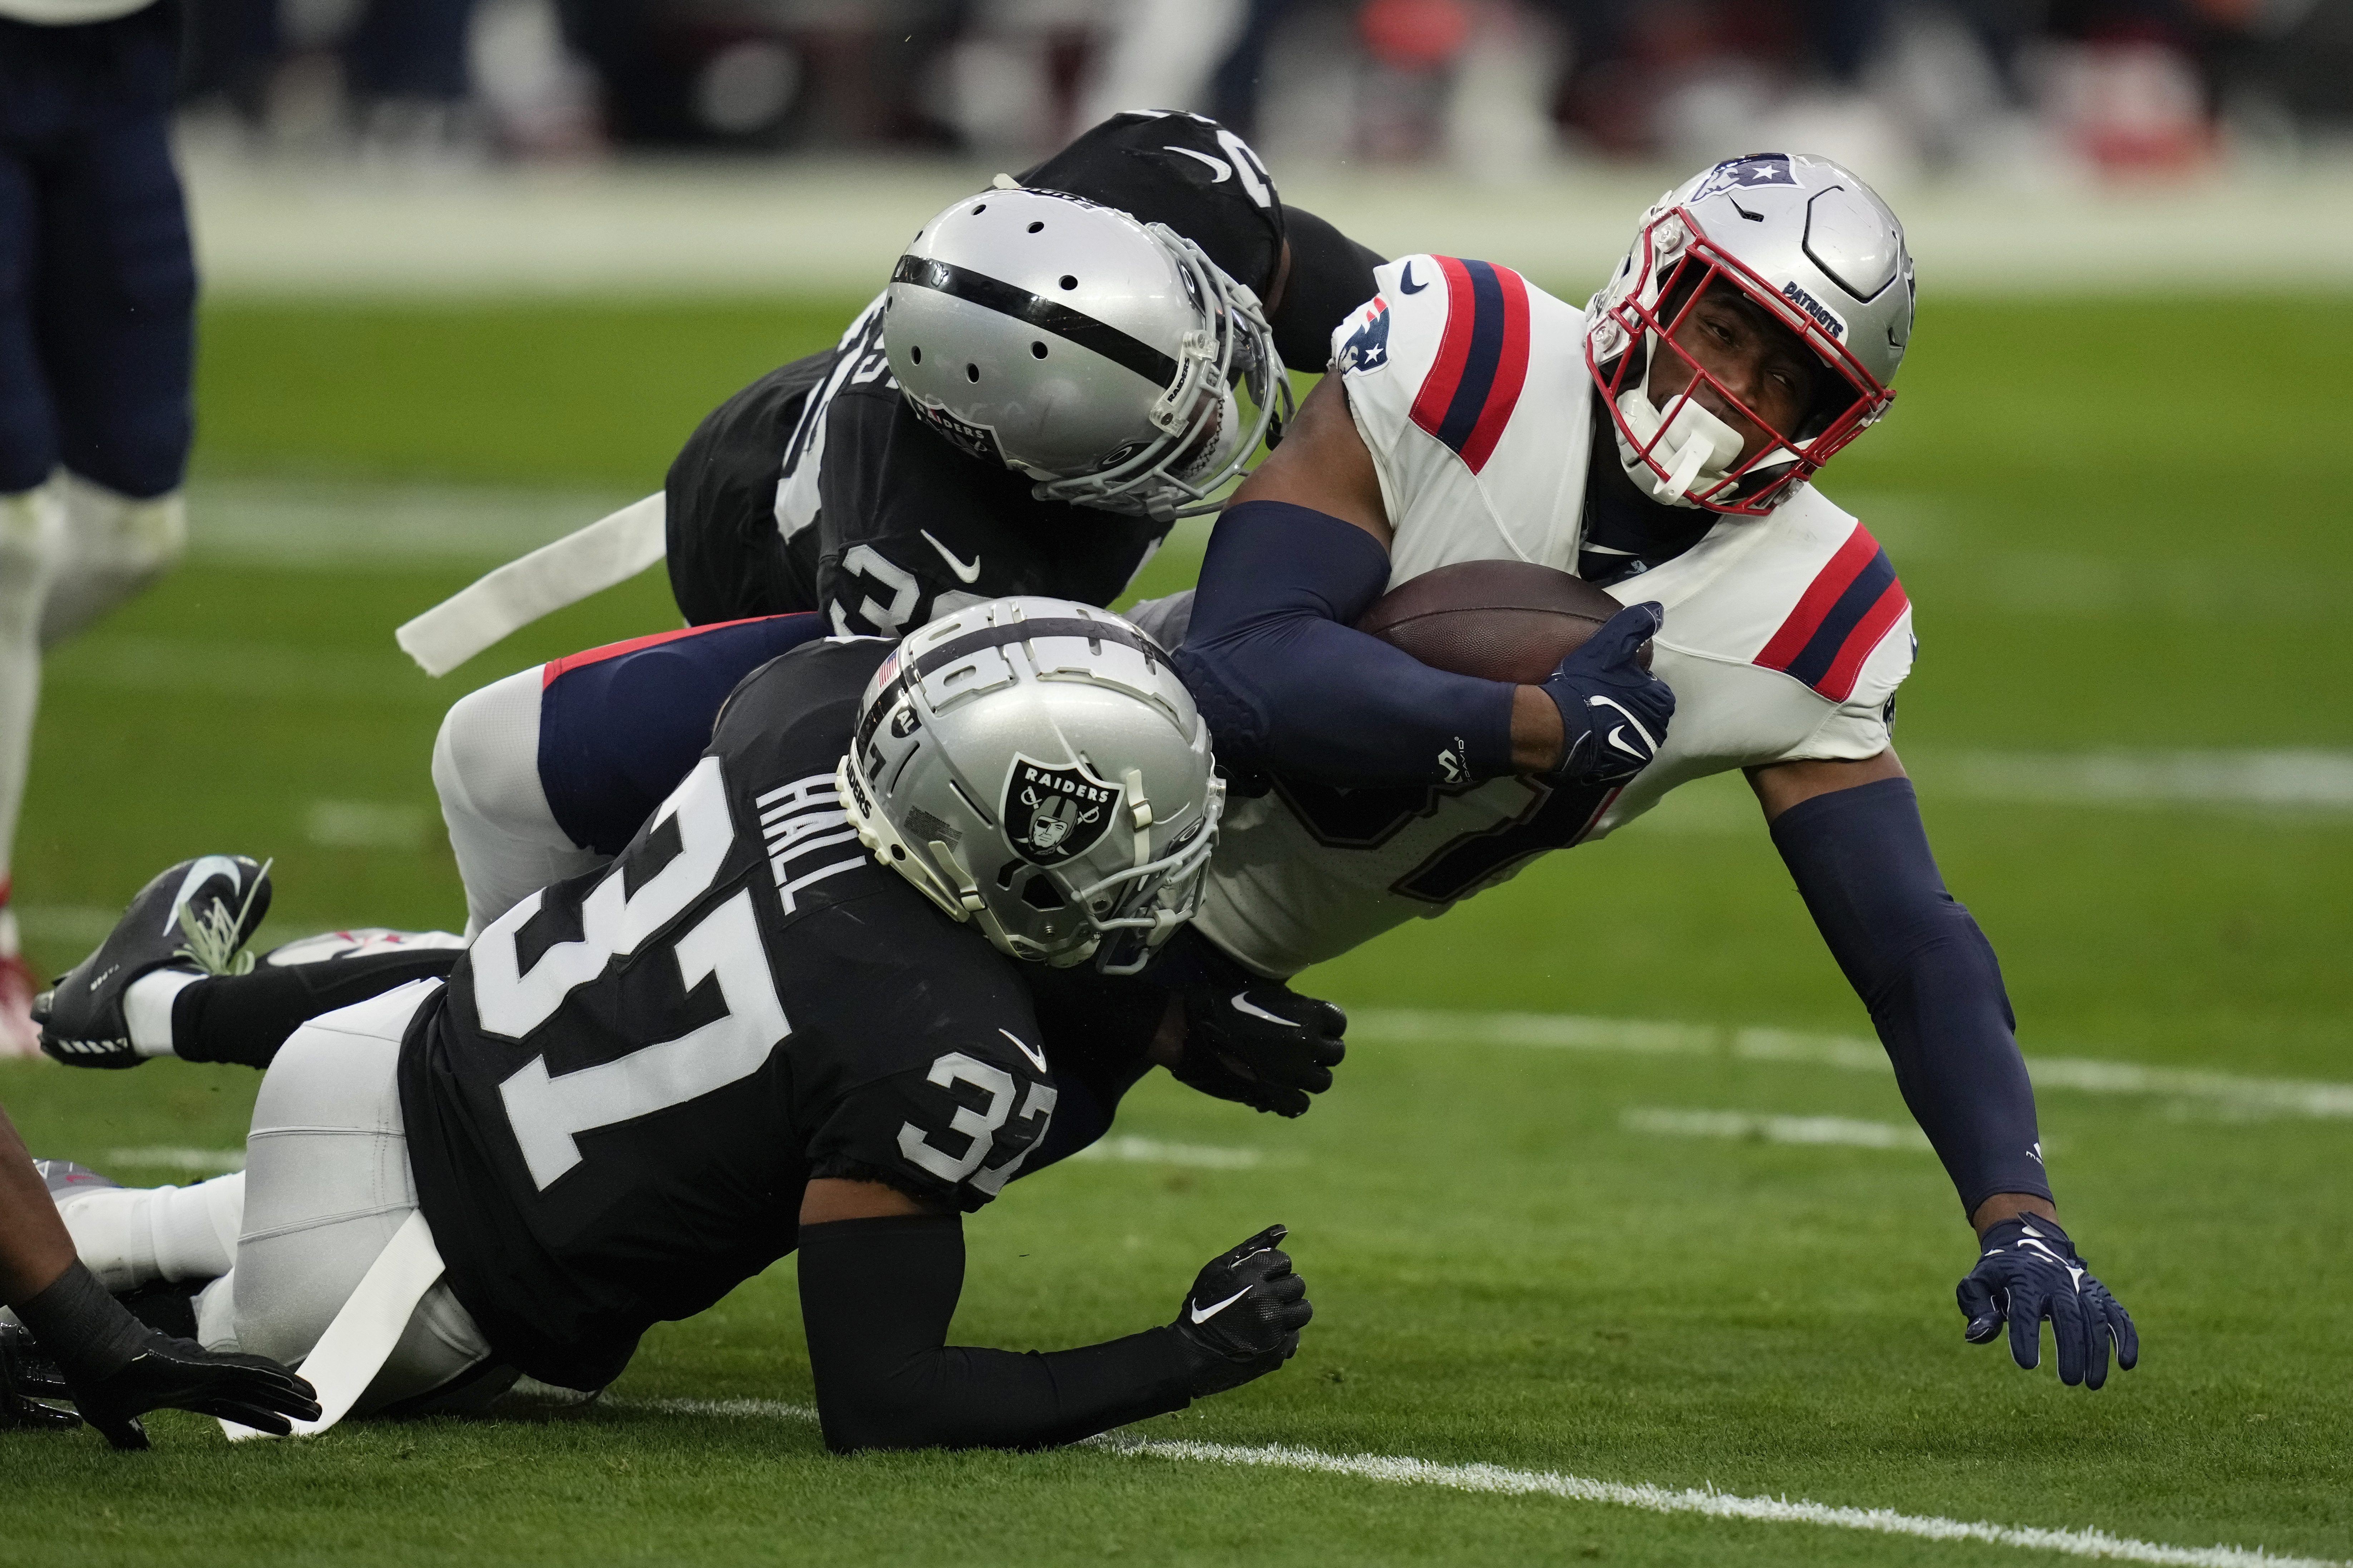 Raiders 30, Patriots 24: New England loses stunner on final play 